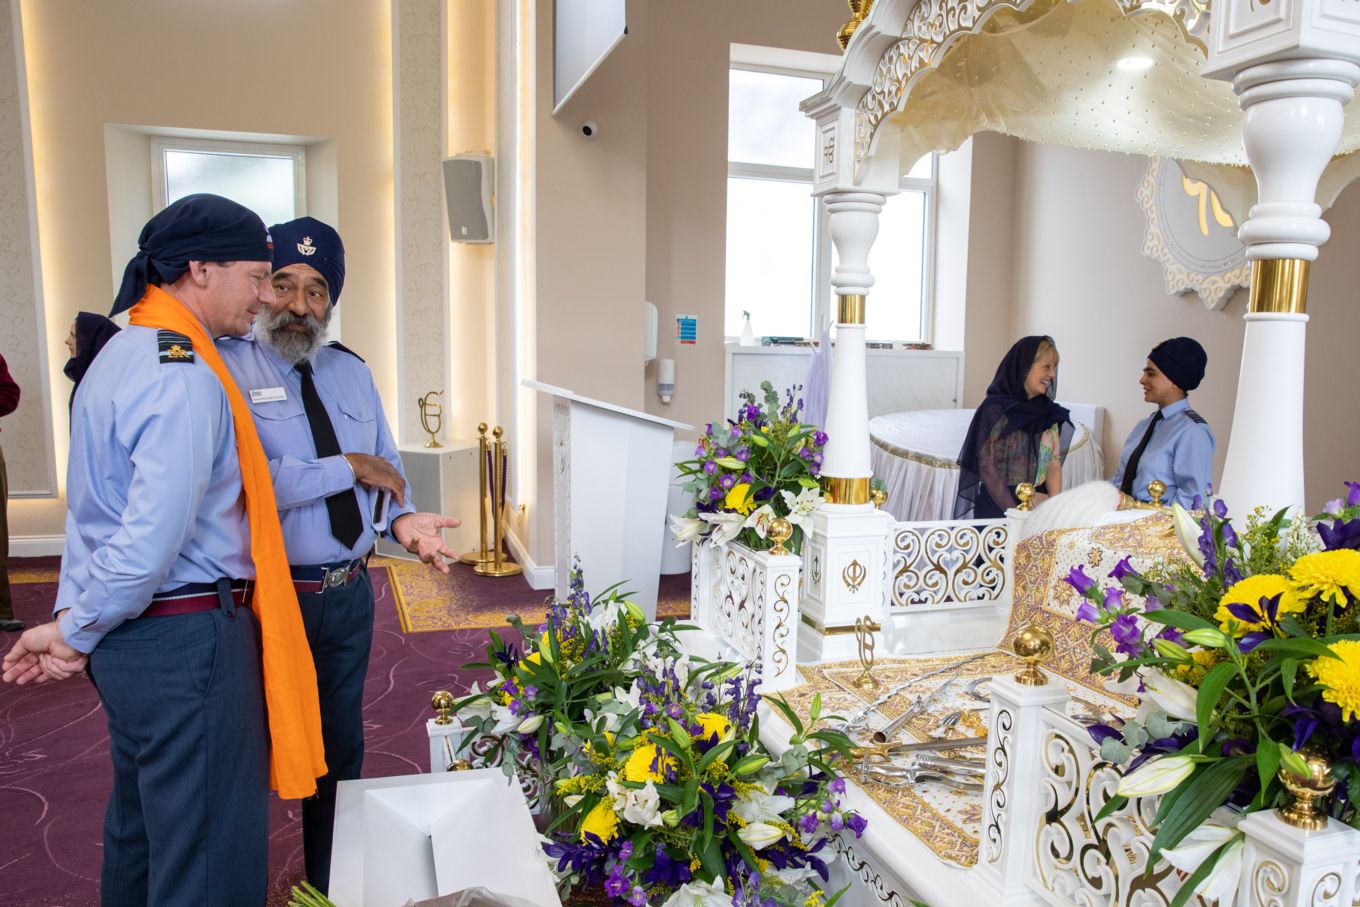 Chief of Air Staff looks on at an ornate chair display and flowers in the temple. 